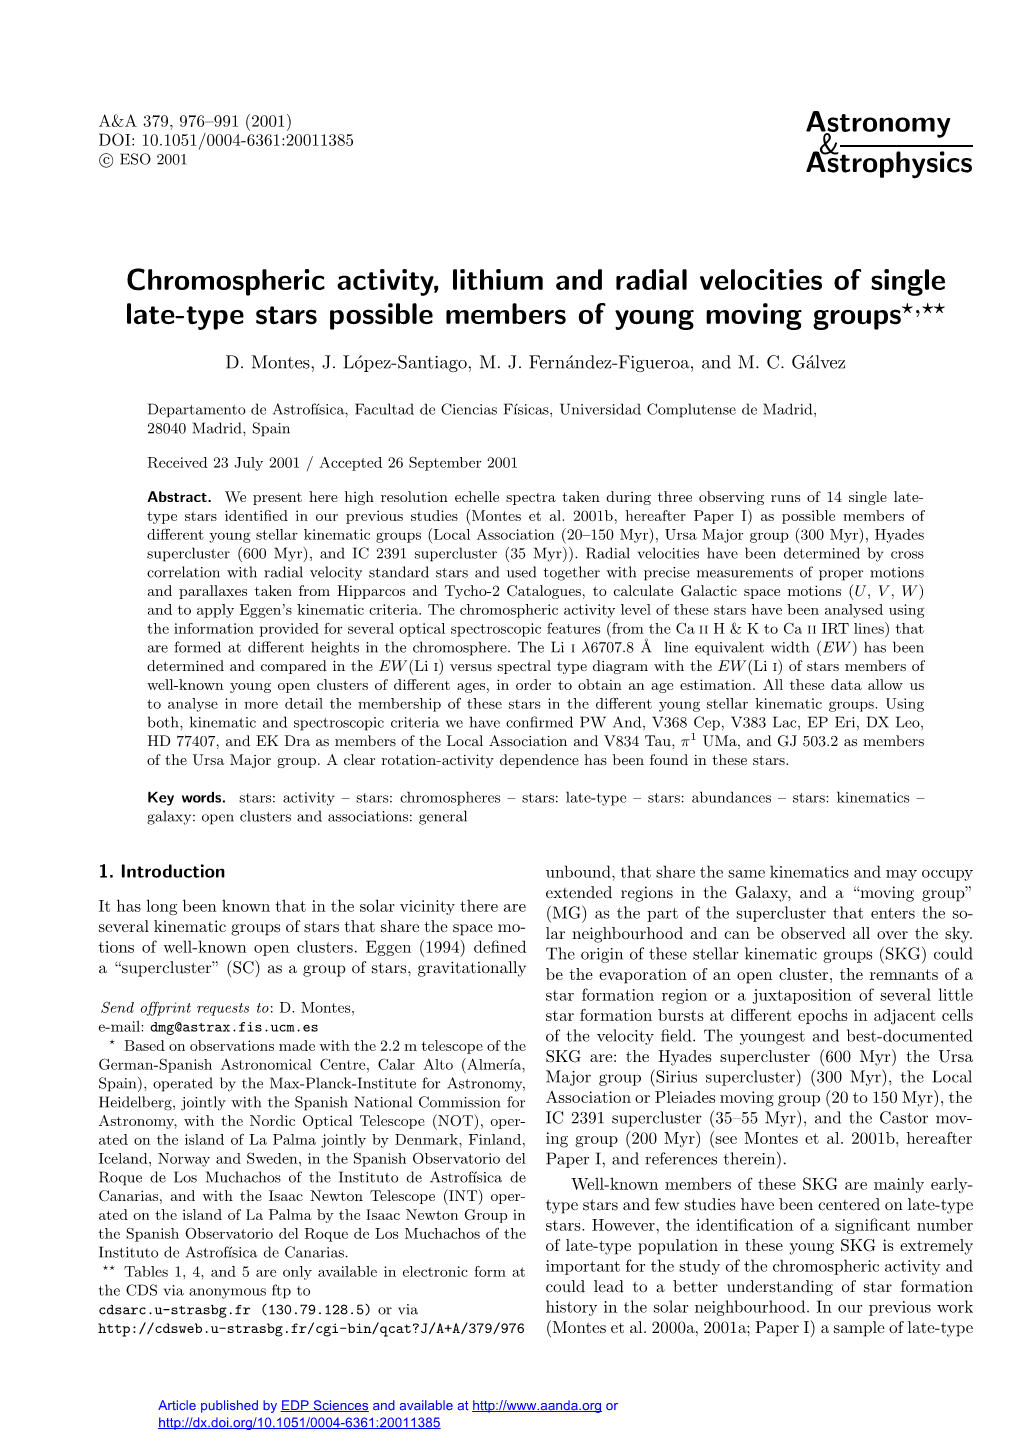 Chromospheric Activity, Lithium and Radial Velocities of Single Late-Type Stars Possible Members of Young Moving Groups?,??